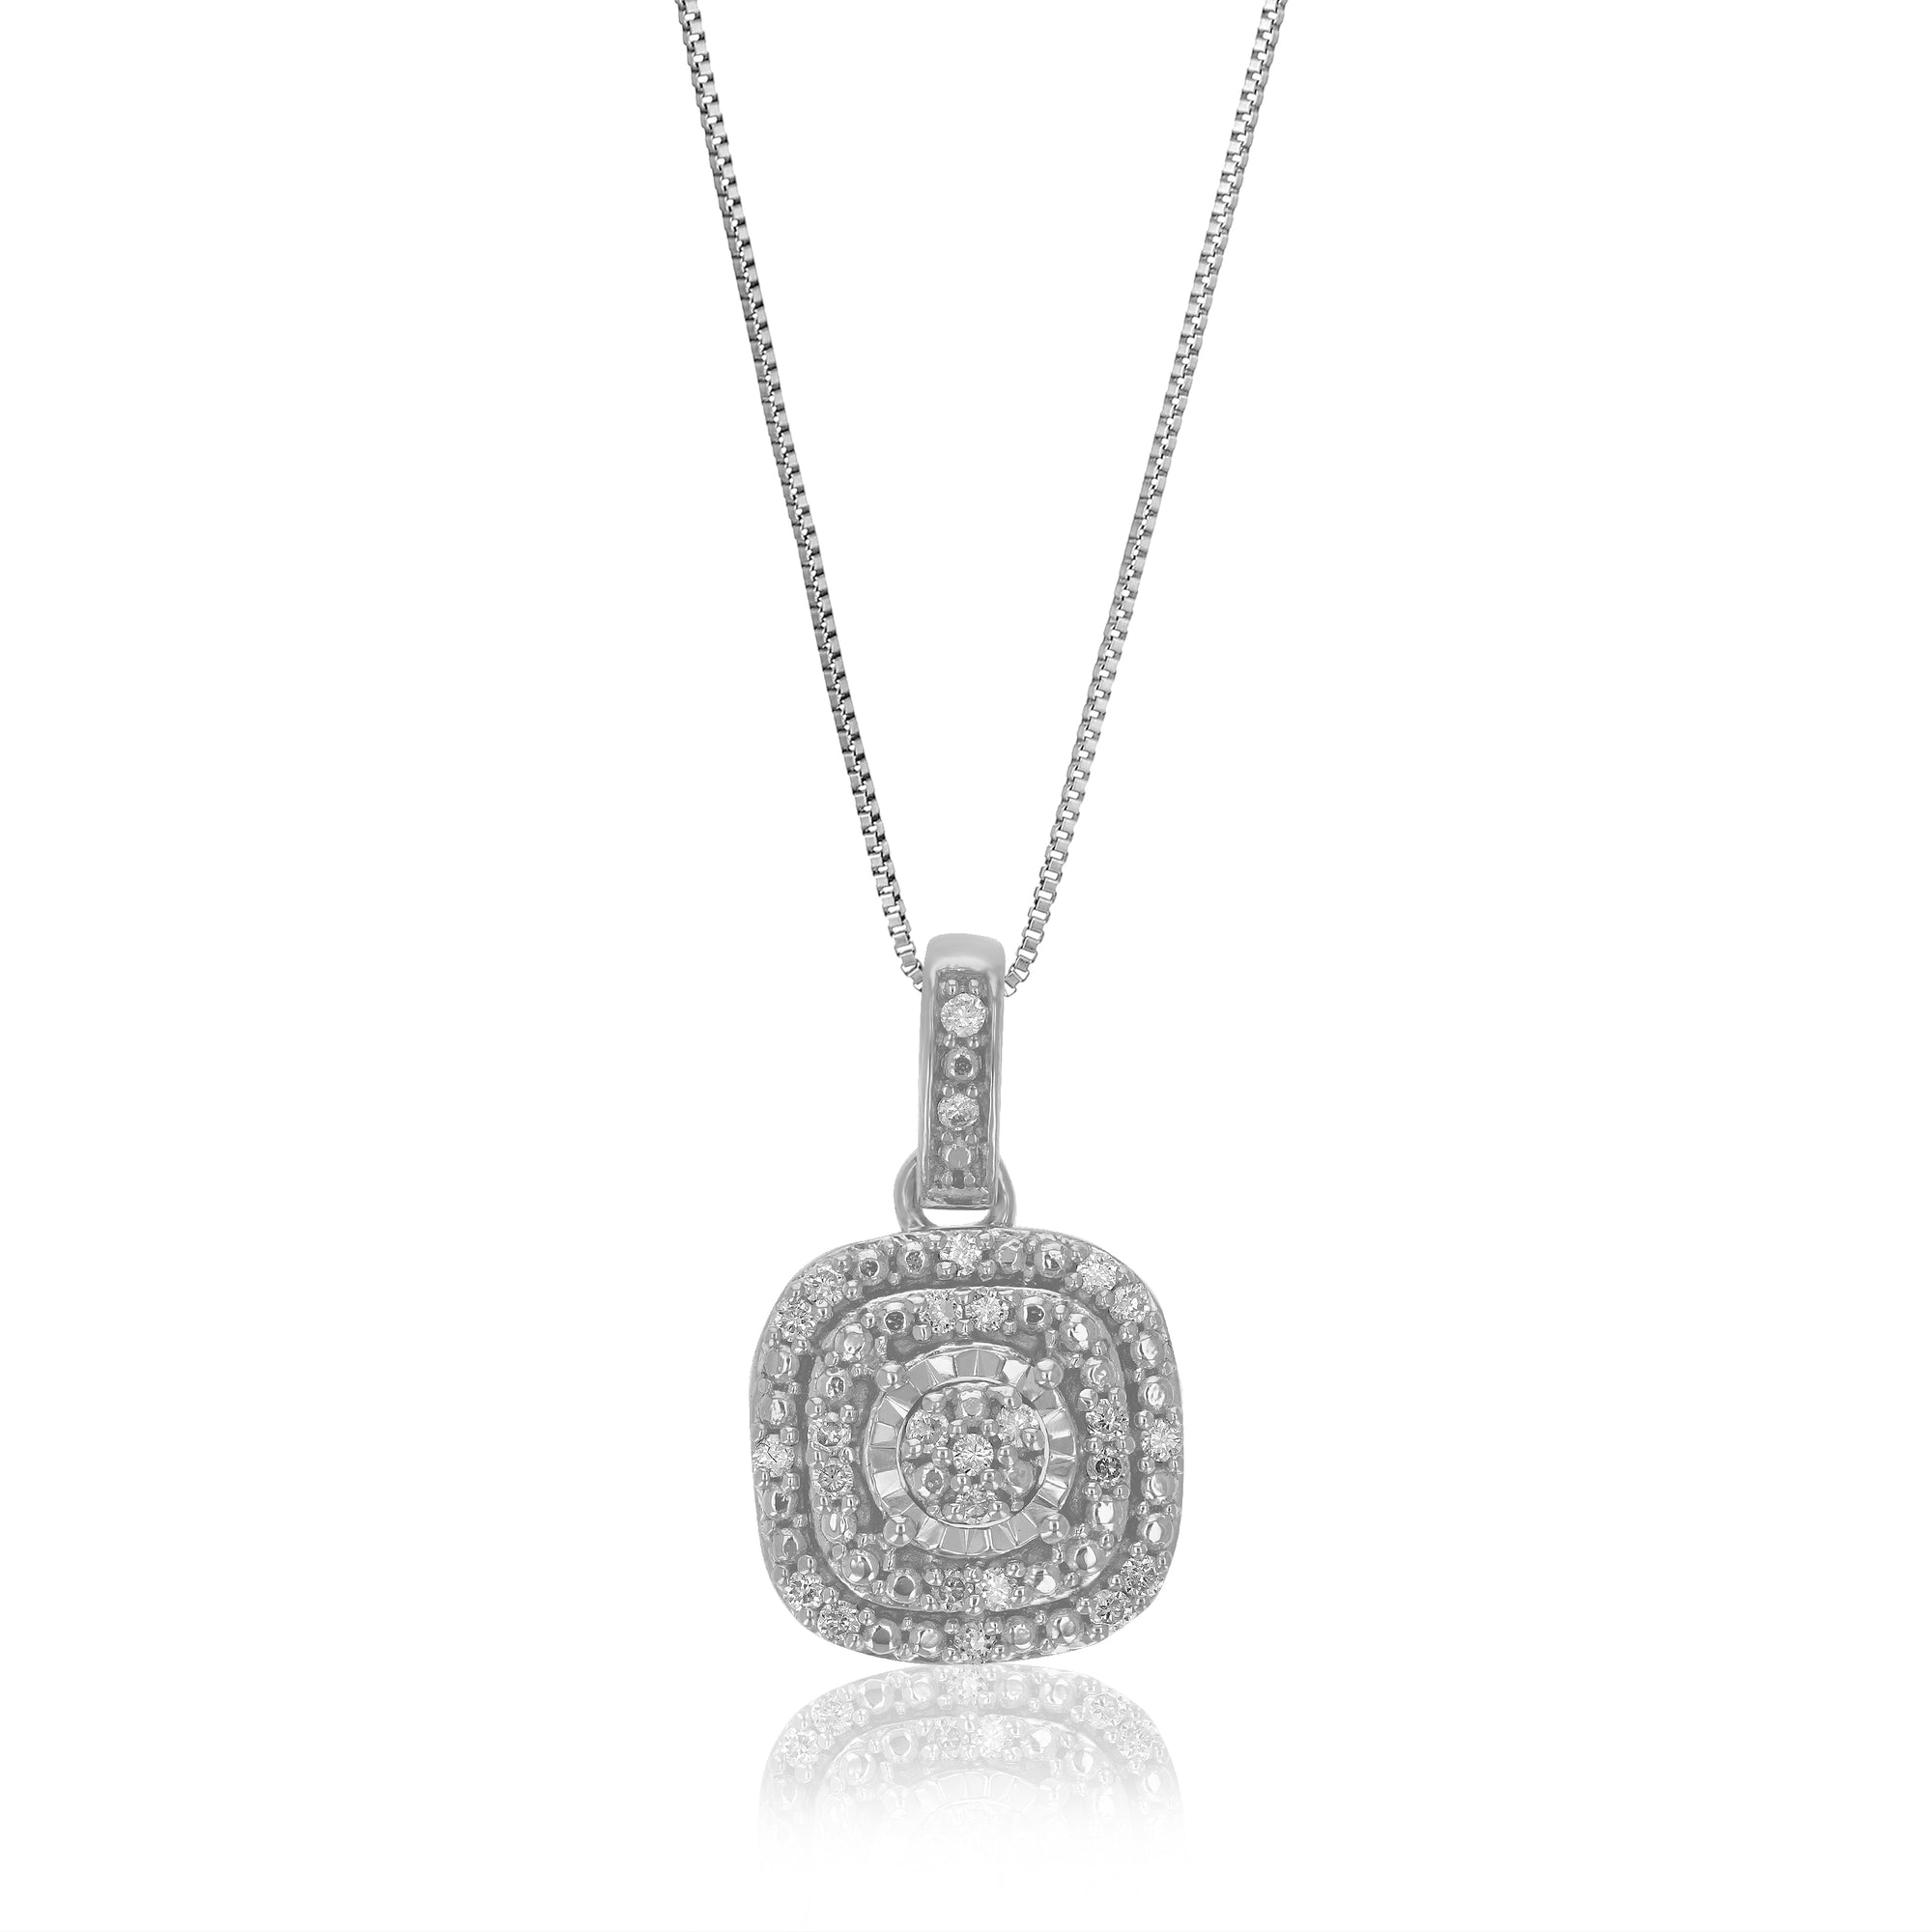 1/10 cttw Diamond Pendant Necklace for Women, Lab Grown Diamond Square Pendant Necklace in .925 Sterling Silver with Chain, Size 2/3 Inch